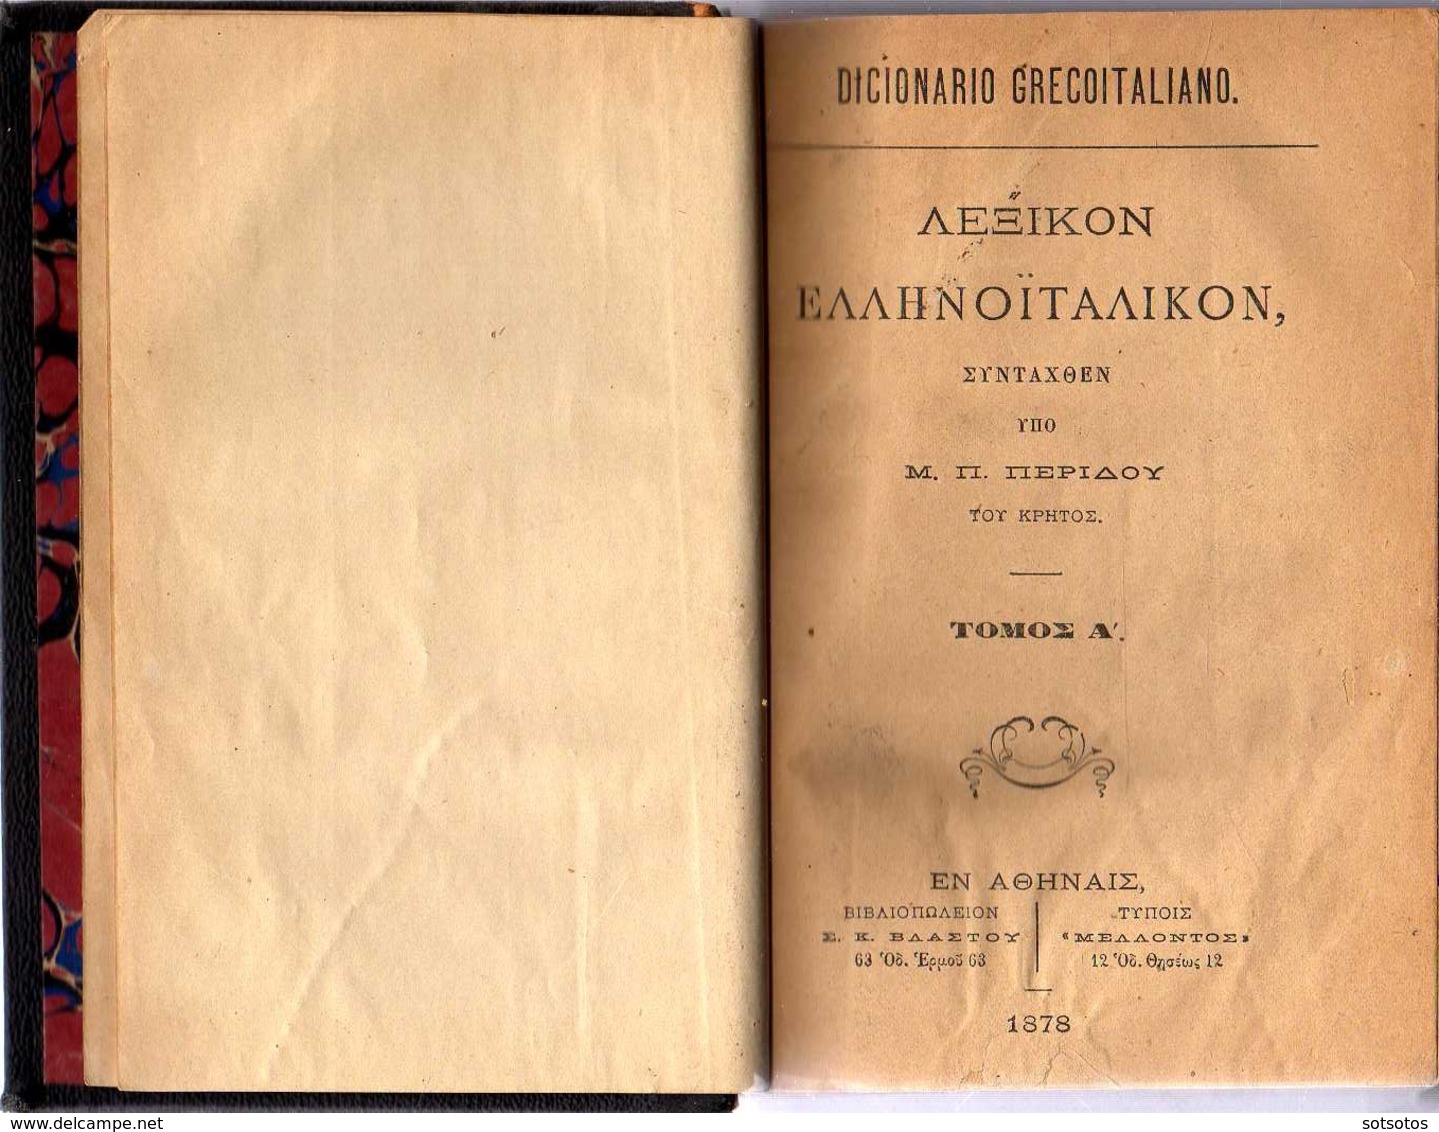 GREEK BOOK: GREC-ΙΤΑLΙΑΝ Lexicon – M. PERIDIS (Athens 1878) - 1870 Pages (12X18 Cent.) Covers Without Spines But Text Ve - Dictionaries